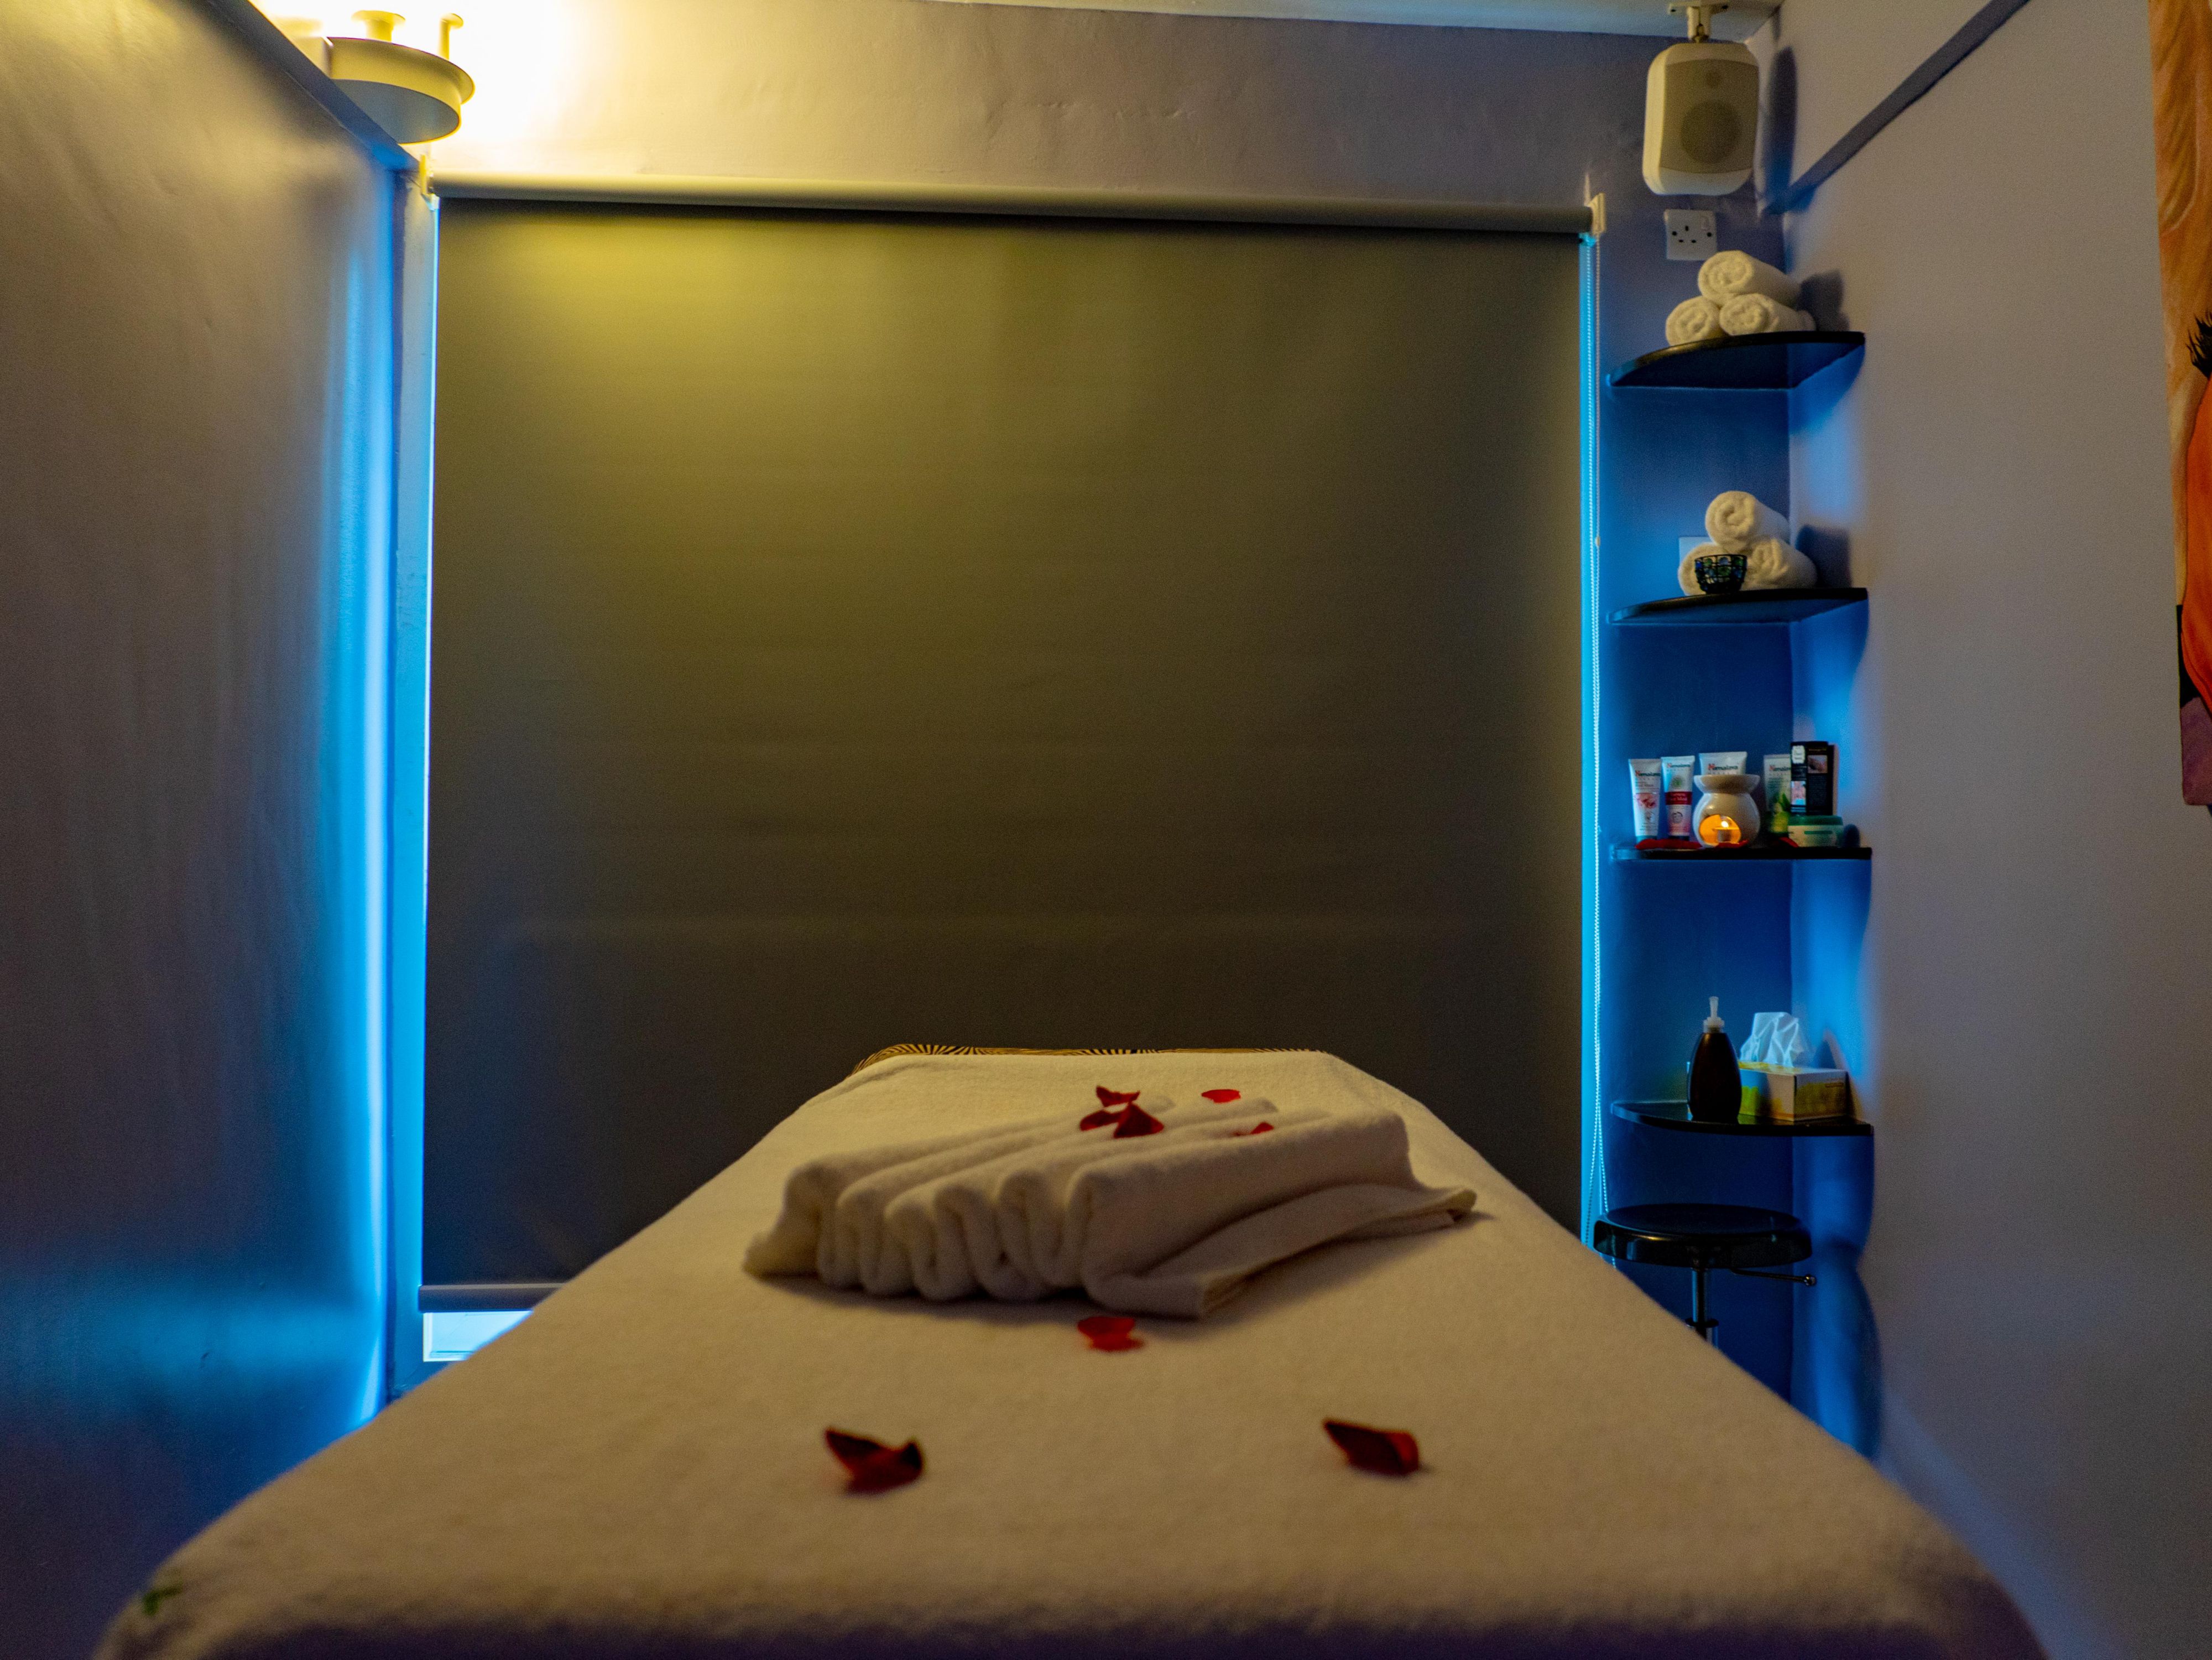 You can get relaxed out of your whole day stress at our Spa centre on second floor i providing variety of massages with Ayurveda technique, Steam and Sauna rooms ready to serve you.